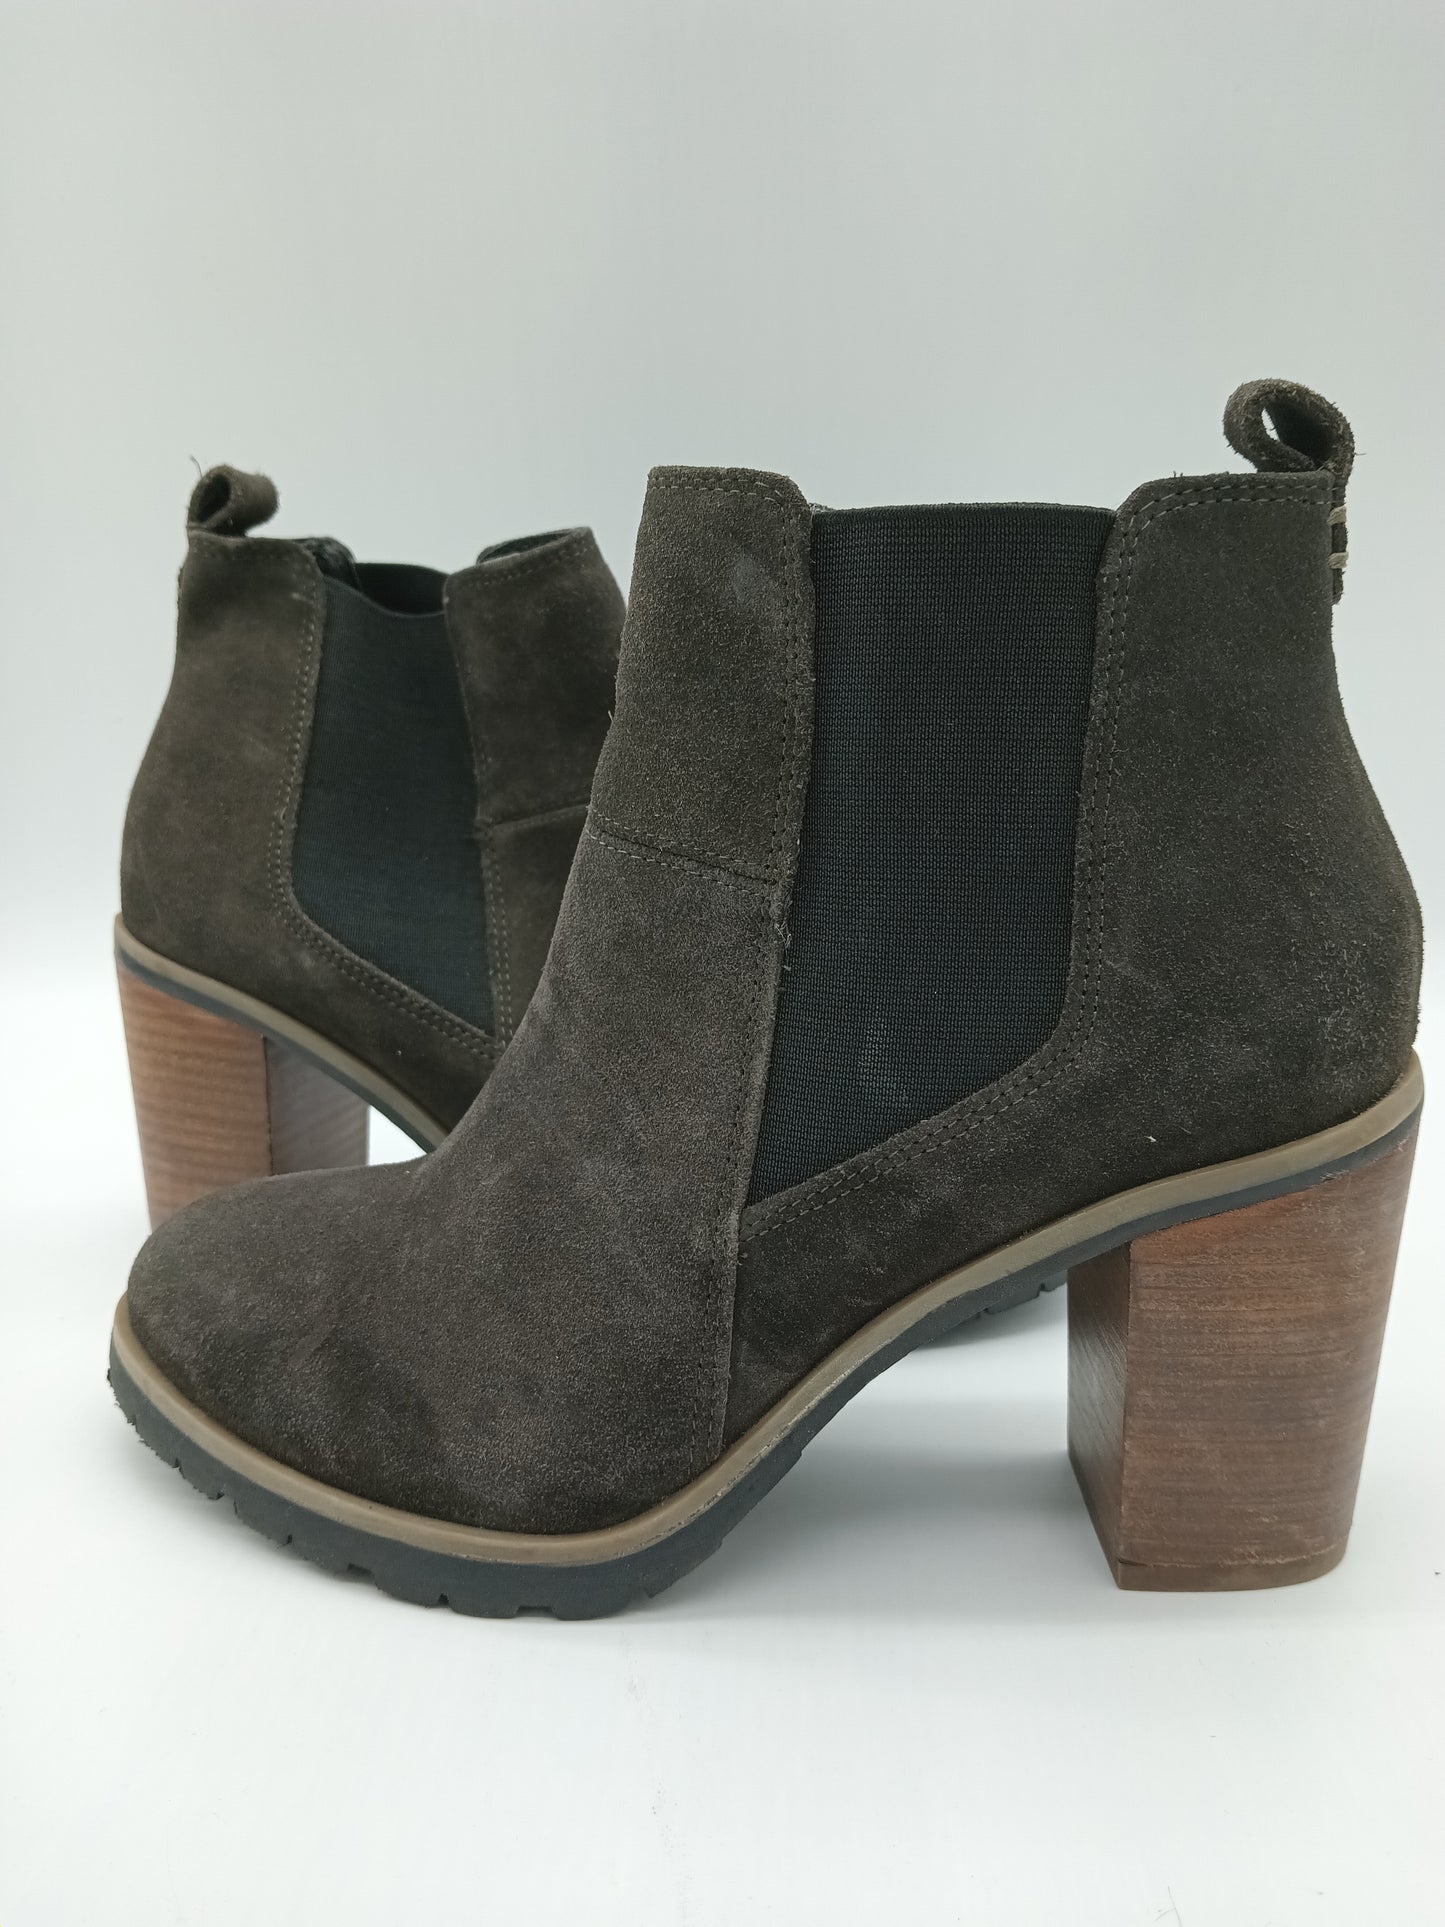 *Crevo Alicia Ankle Boots Charcoal Suede Ladies Sz 9